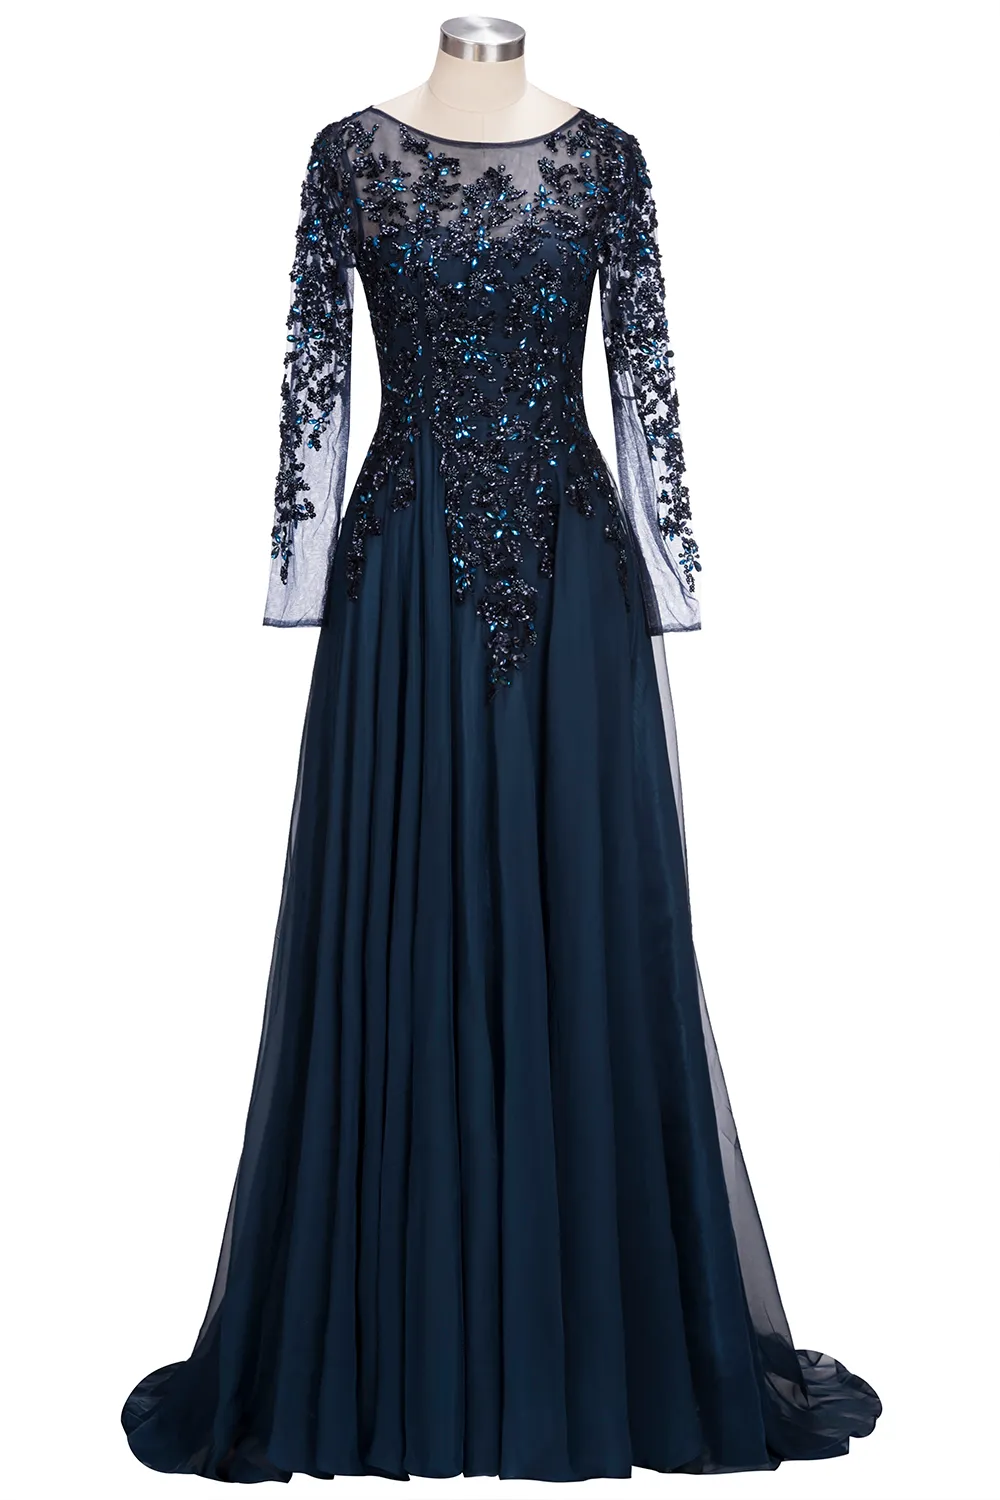 Navy Blue Sheer Long Sleeves Chiffon Mother Of The Bride Dresses Beaded Stones Floor Length Formal Party Evening Dresses BA9135